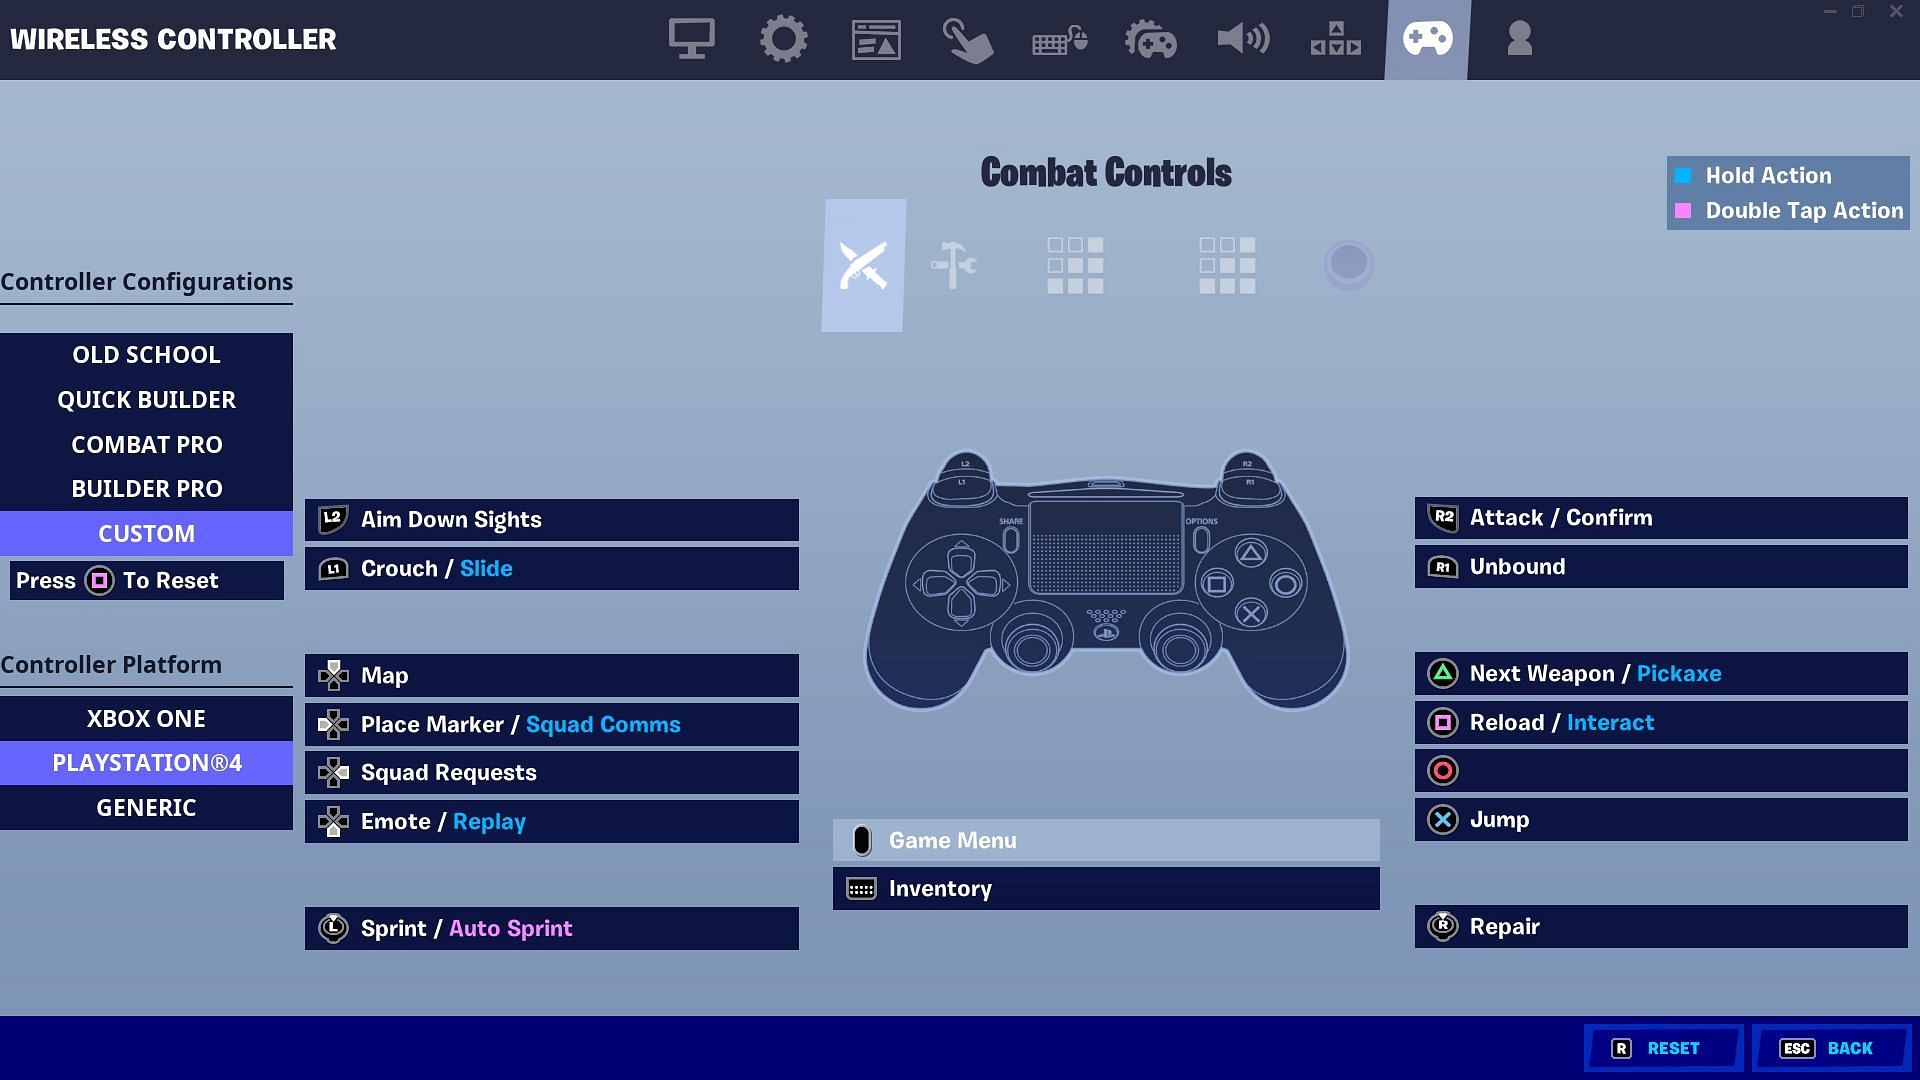 Players can change the functionality of each key (Image via Epic Games/Fortnite)